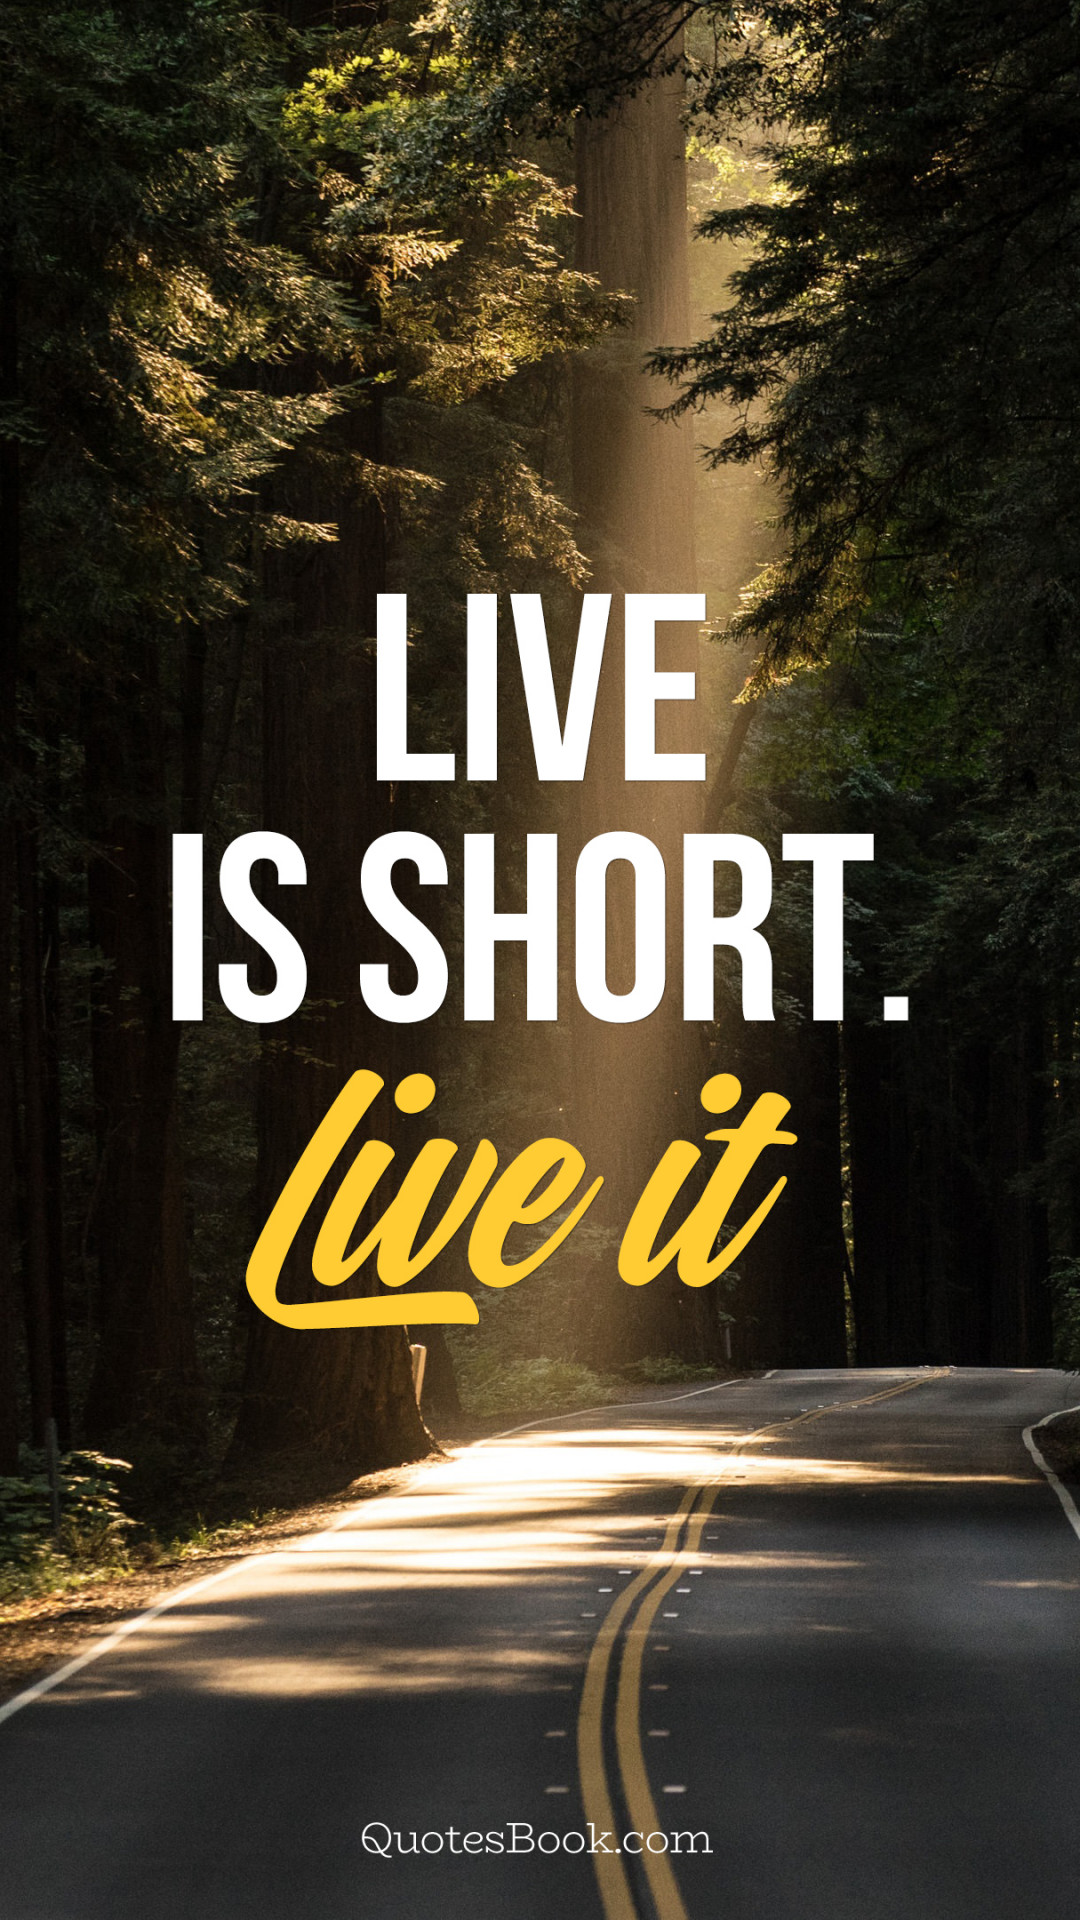 Life is short. Live it QuotesBook